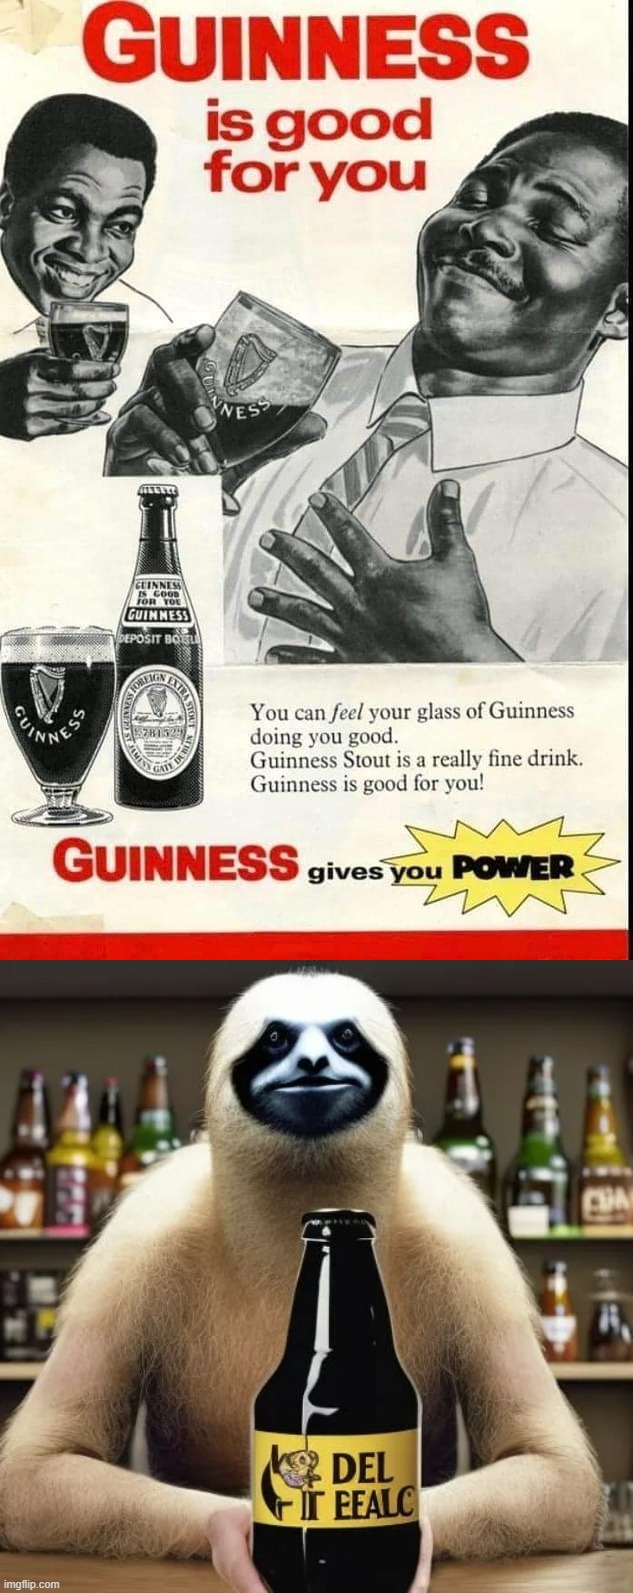 You can feel your glass of Guinness doing you good. Guinness Stout is a really fine drink. Guinness is good for you! | image tagged in guinness is good for you,sloth malt beer,guinness,maltgate,sloth,del eealc | made w/ Imgflip meme maker